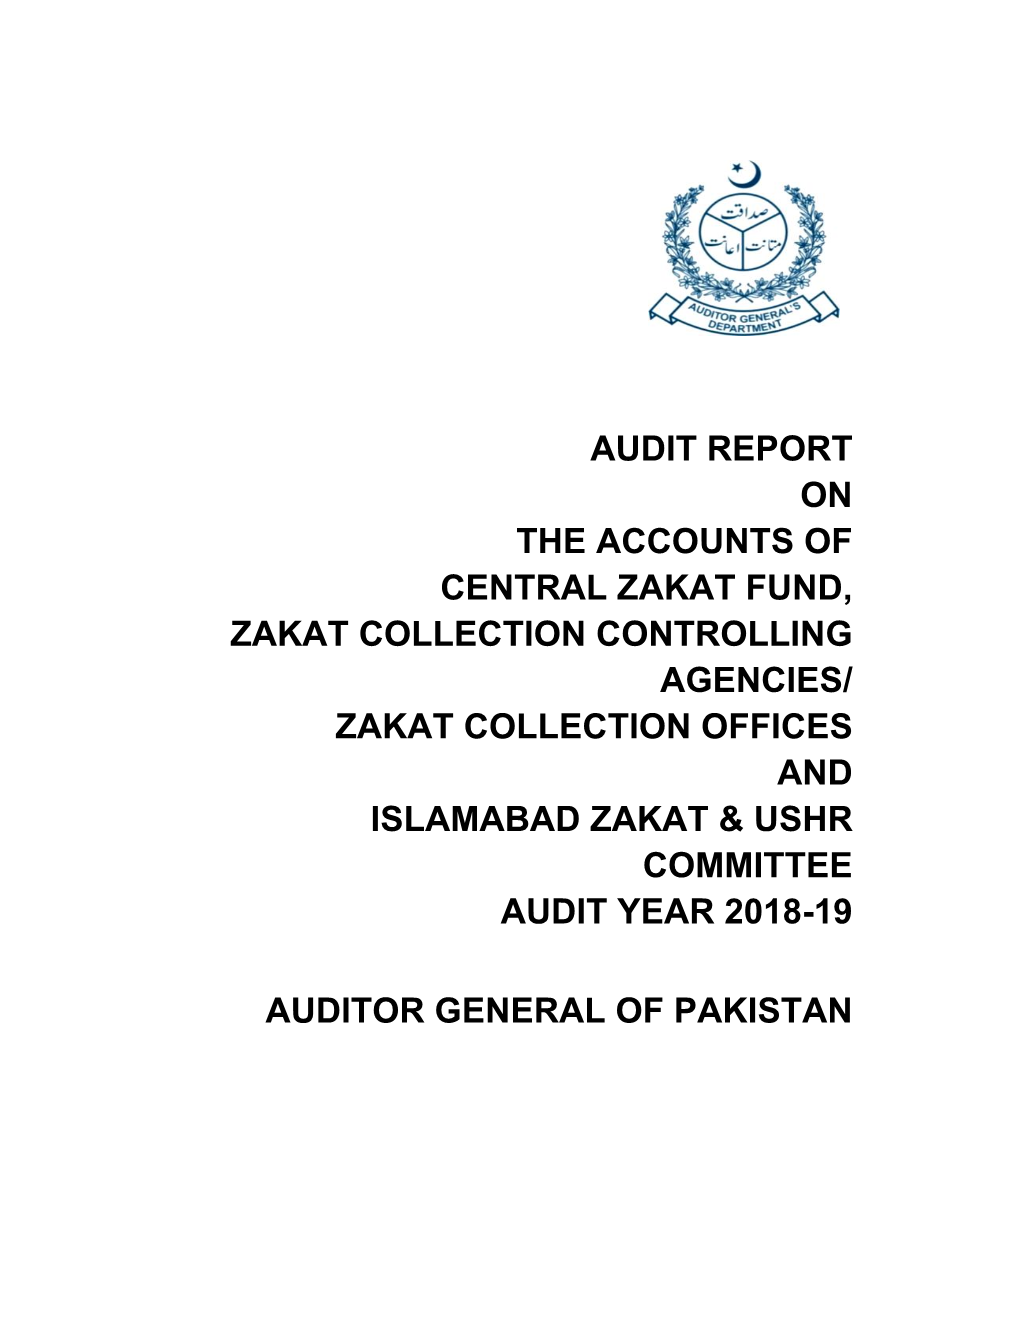 Zakat Collection Offices and Islamabad Zakat & Ushr Committee Audit Year 2018-19